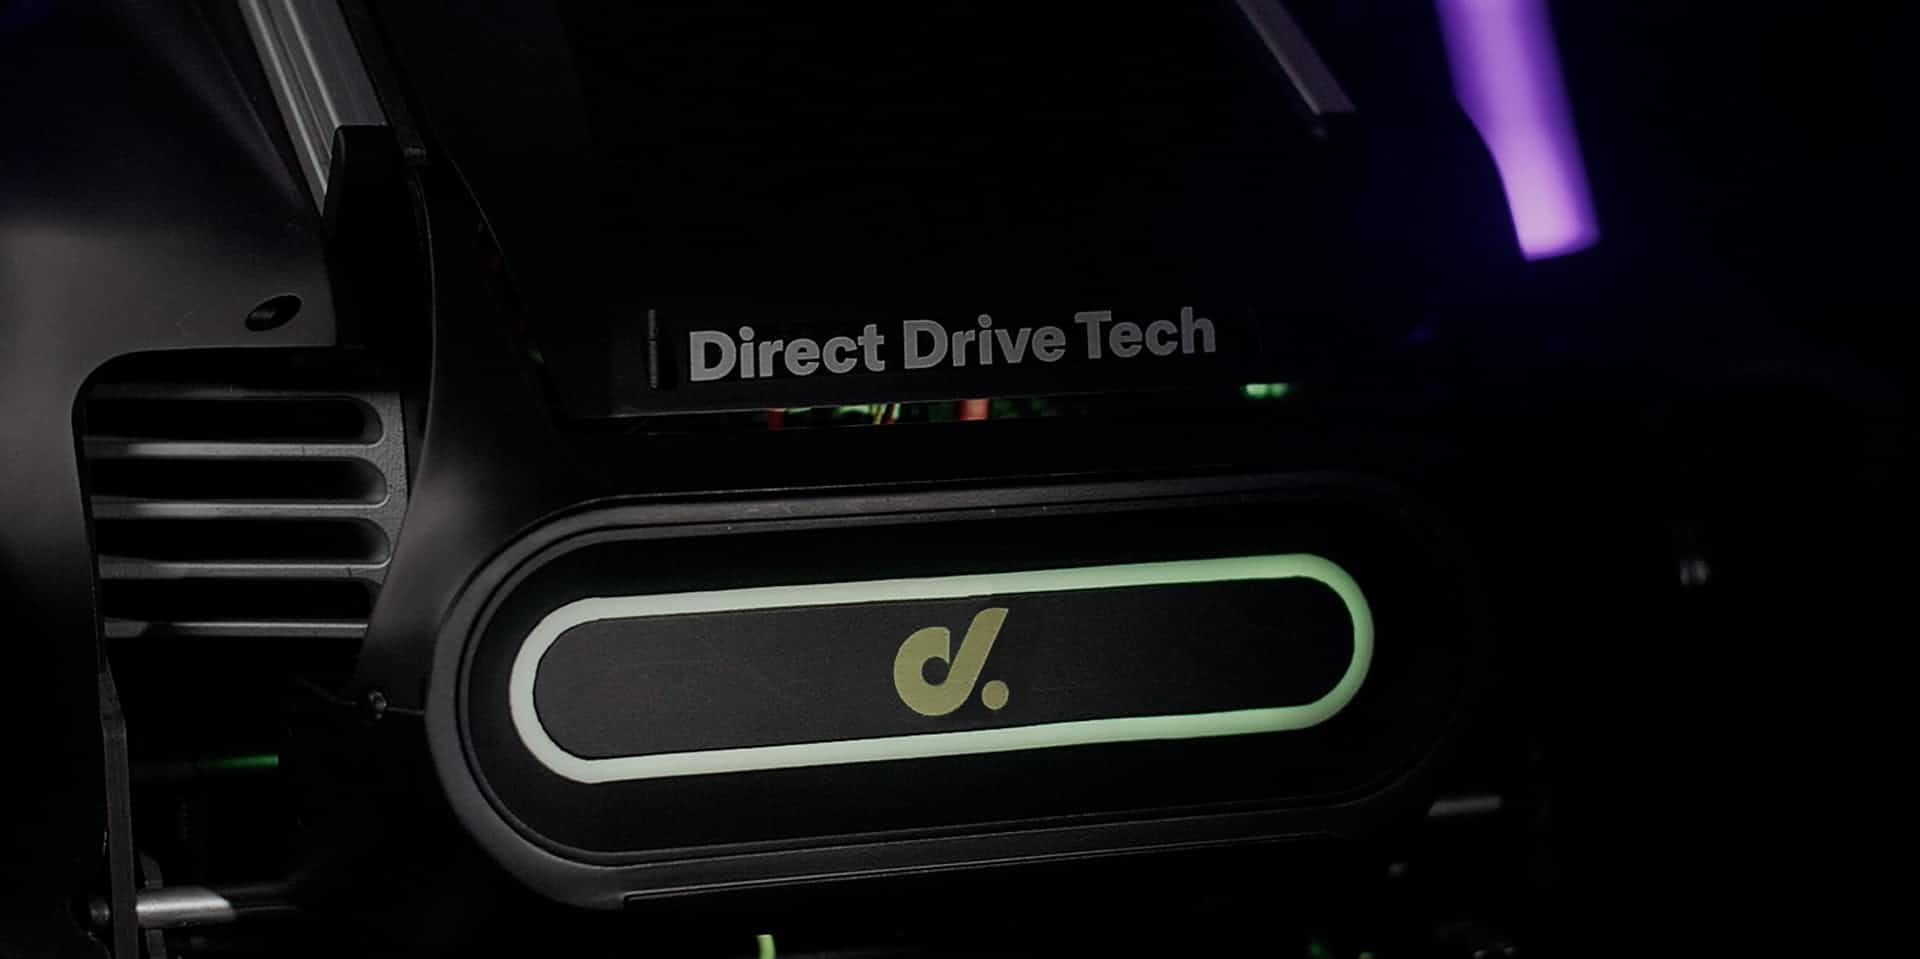 About Direct Drive Tech 